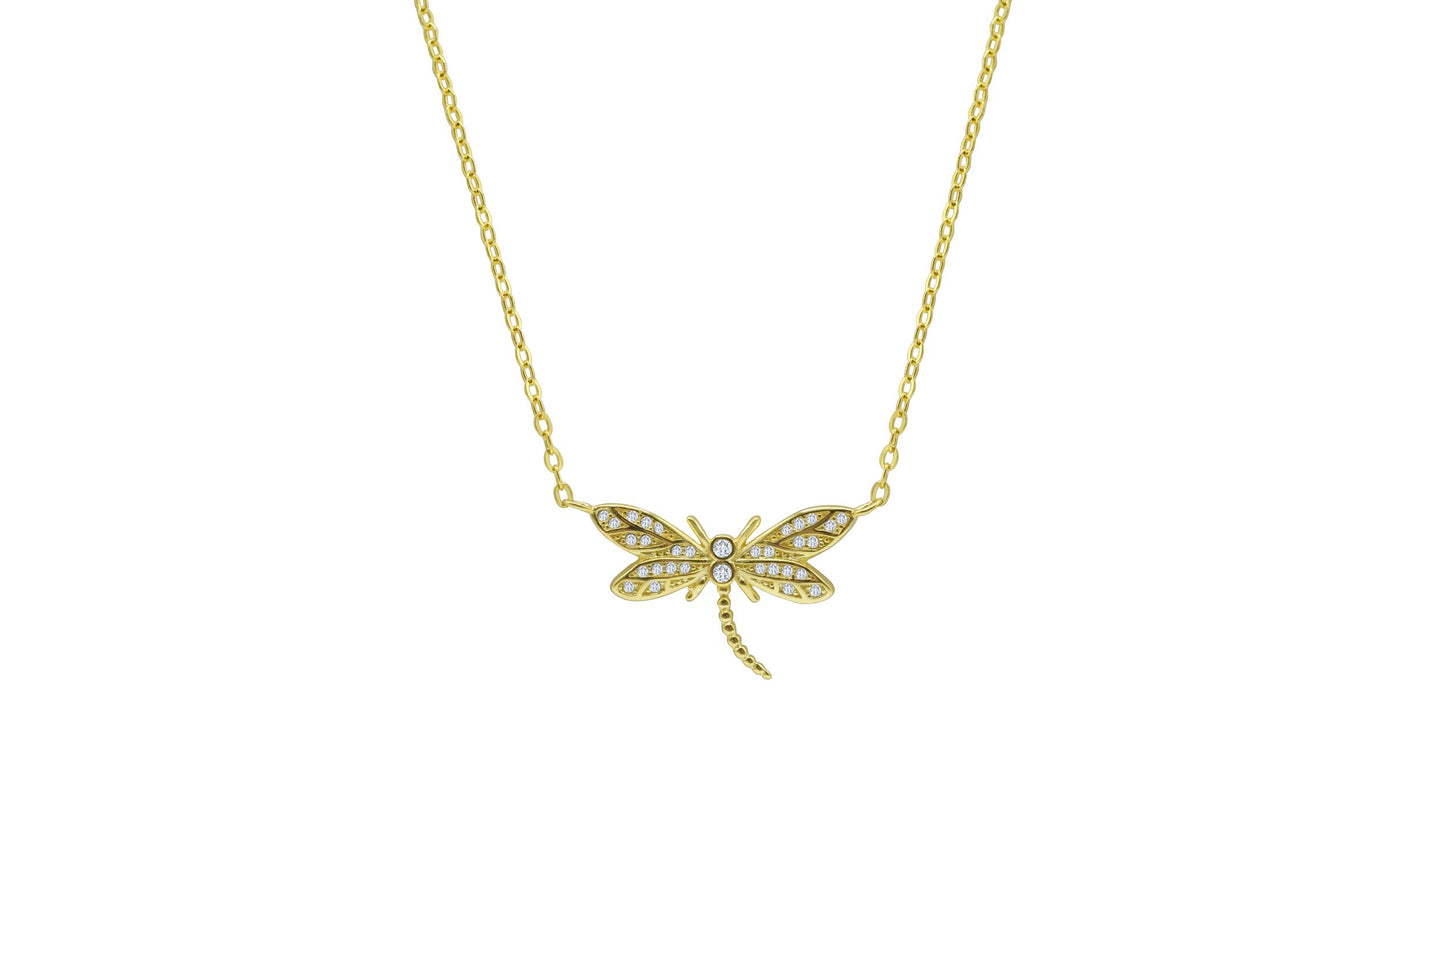 Charm & Chain Necklace - Dragonfly